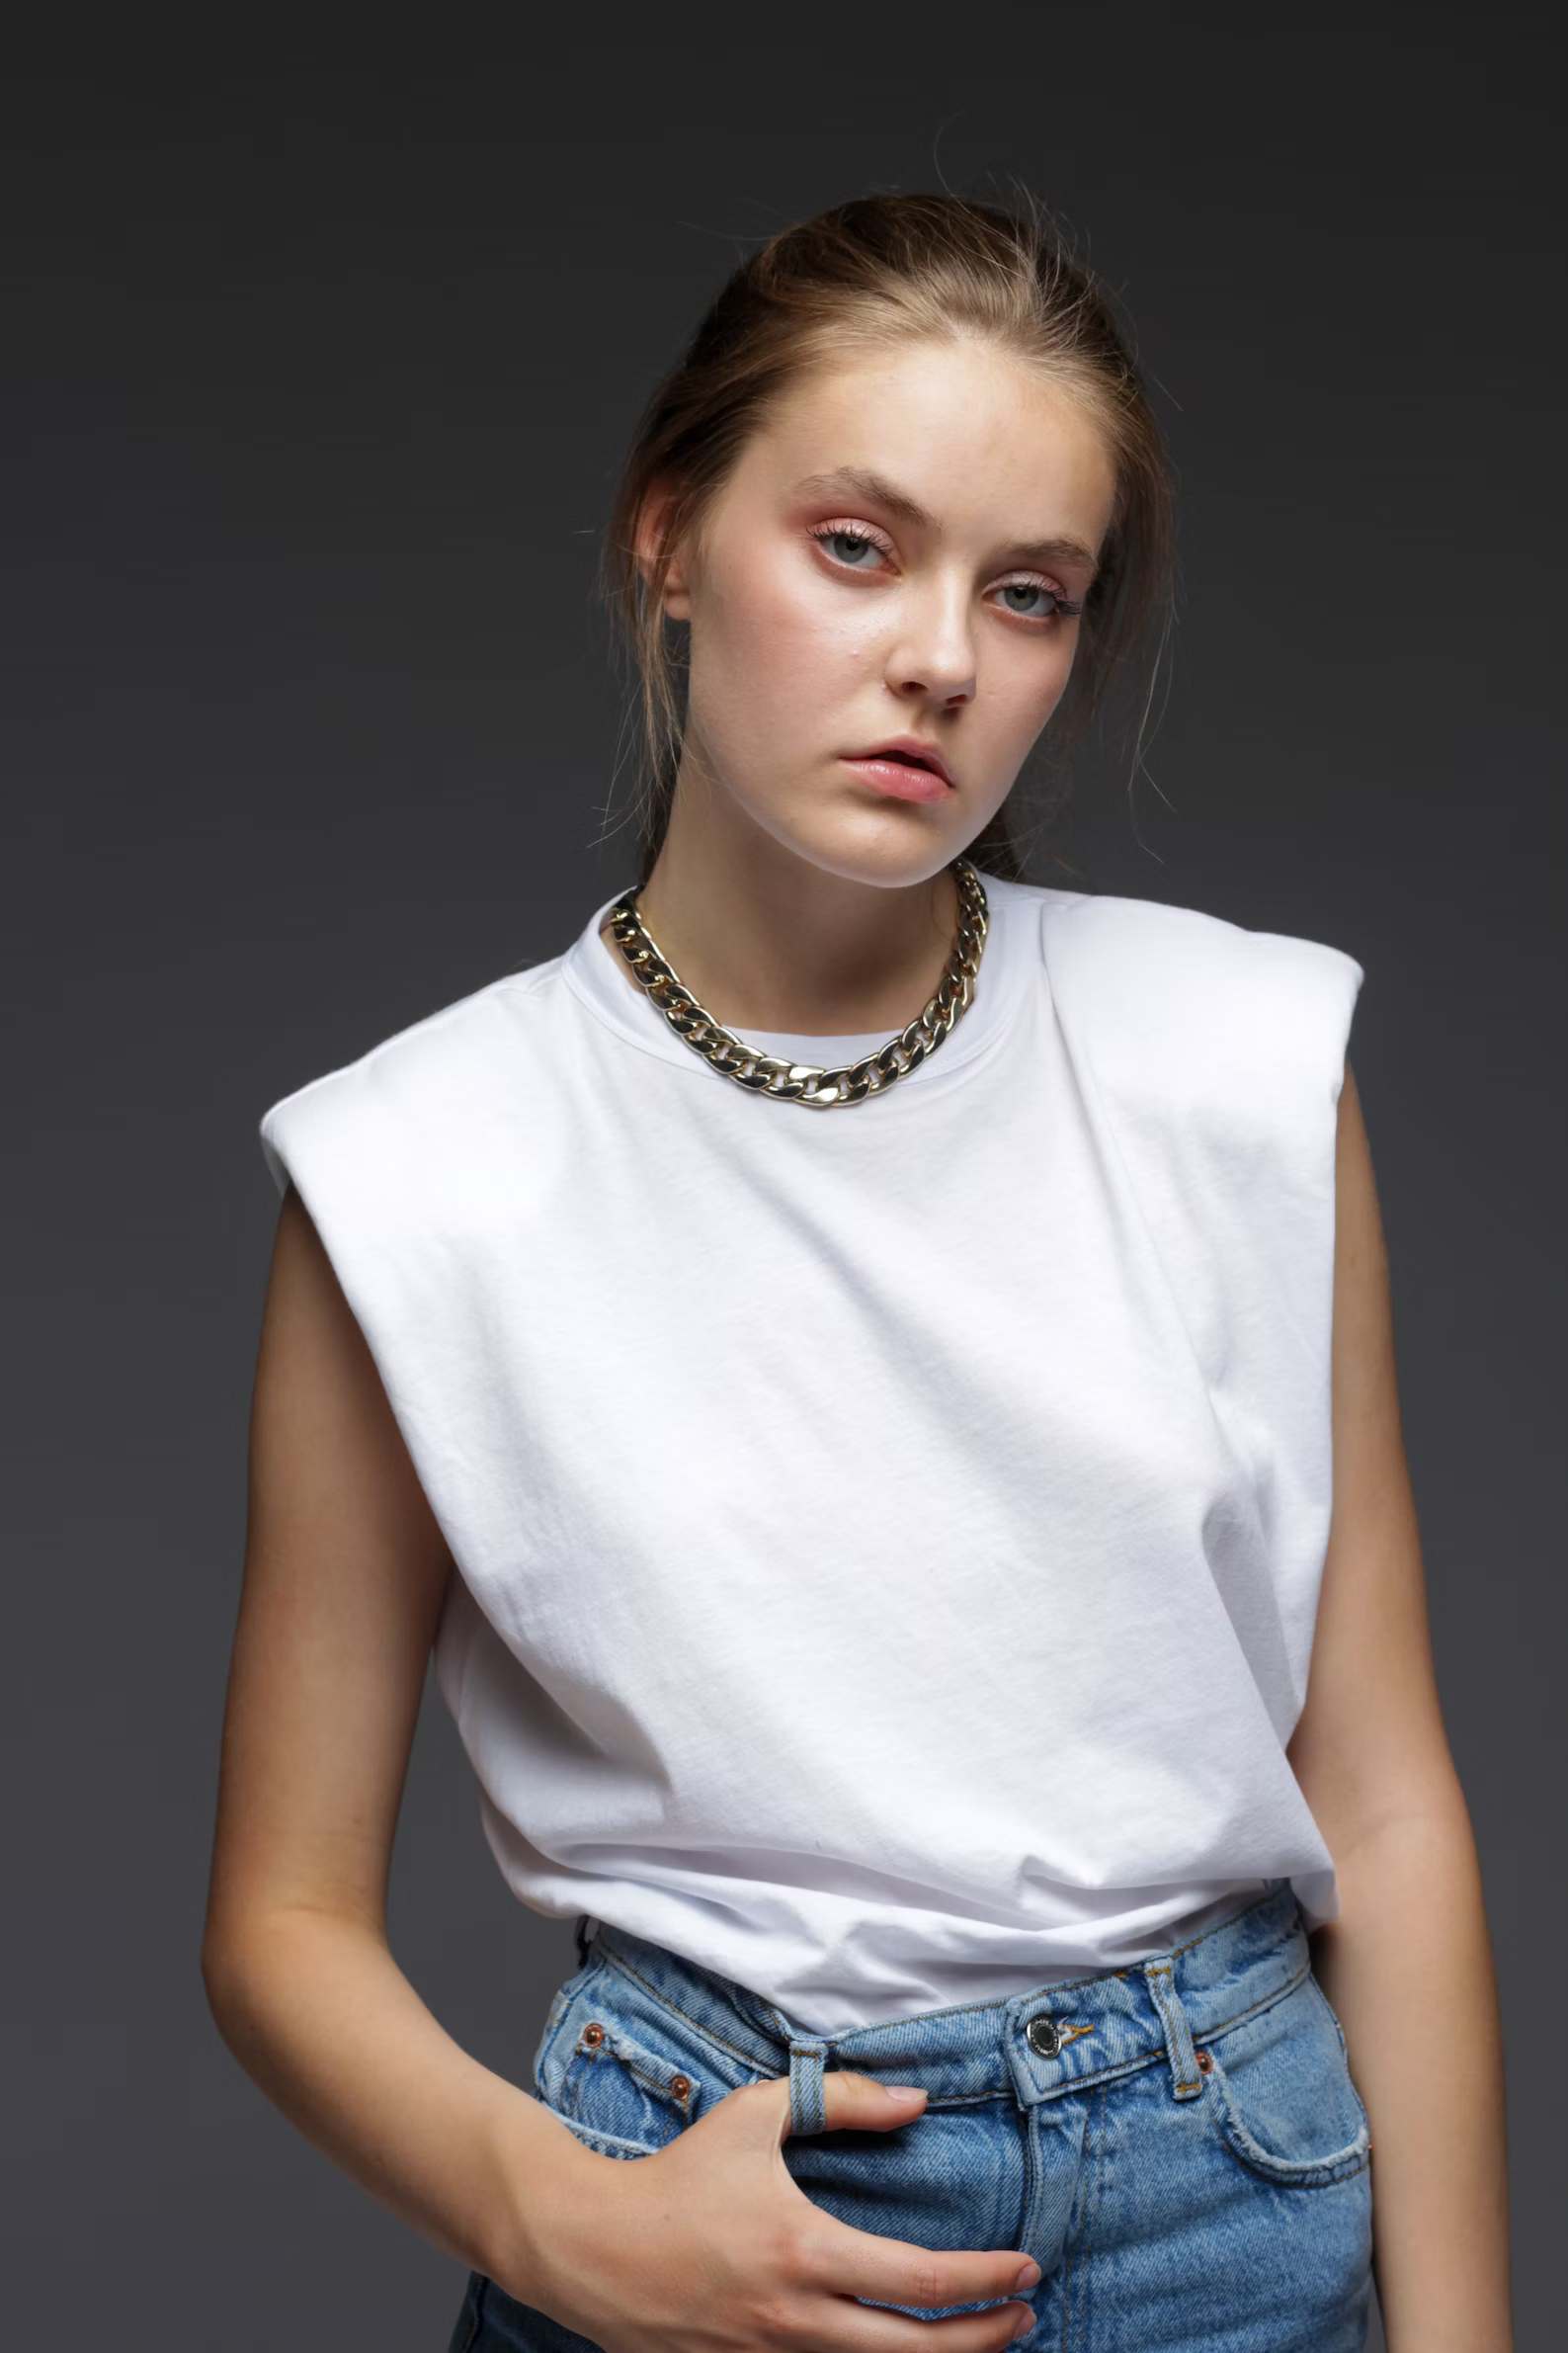 A woman wearing a plain white tee with gold chain